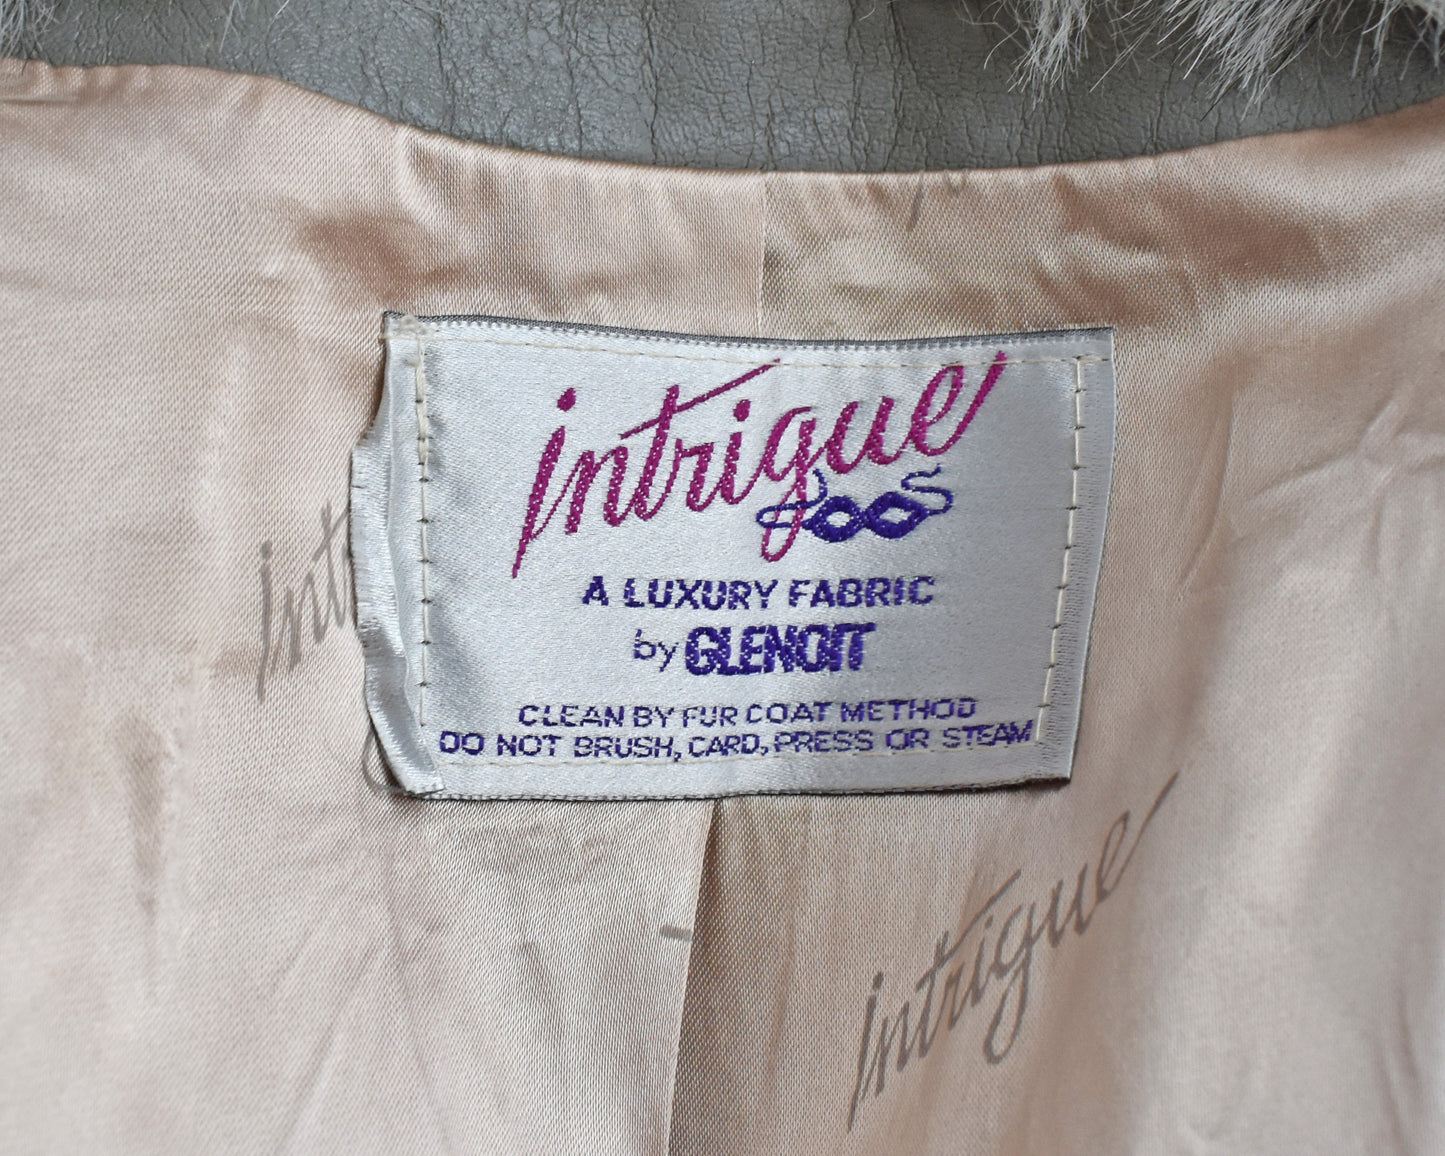 Close up of the tag which says Intrigue, a luxury fabric by Glenoit